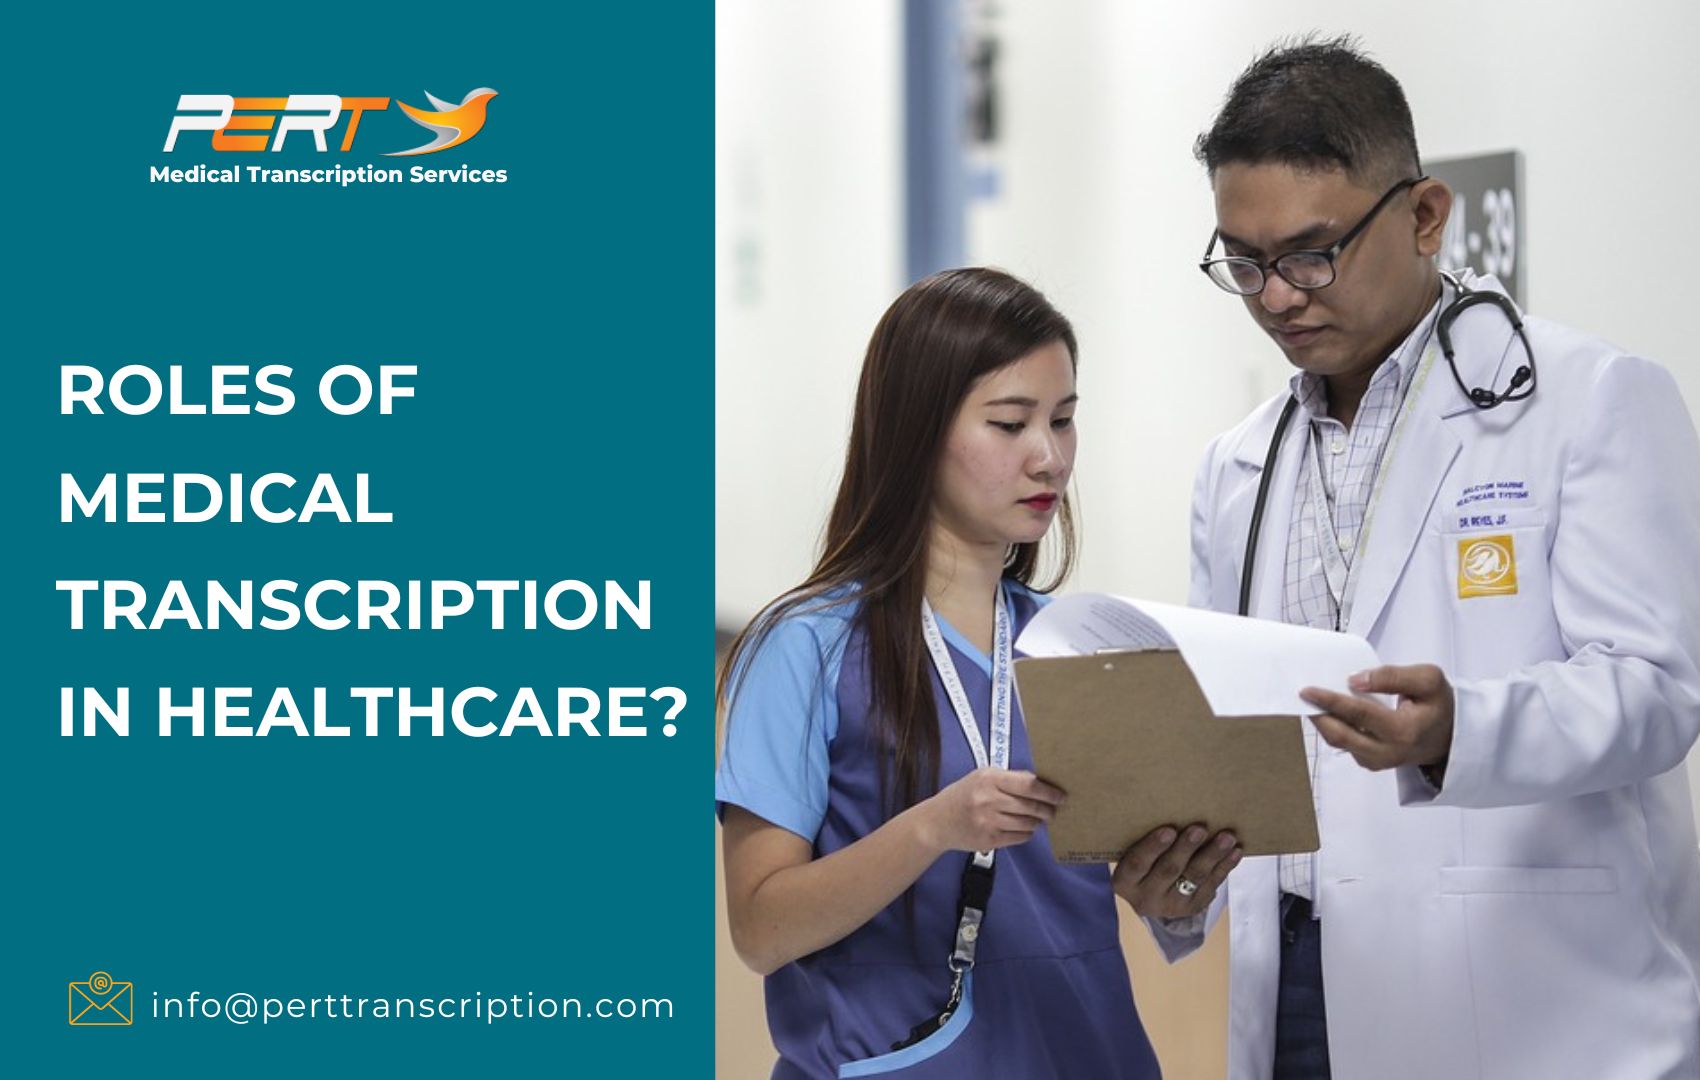 What are the Main Roles of Medical Transcription in Healthcare